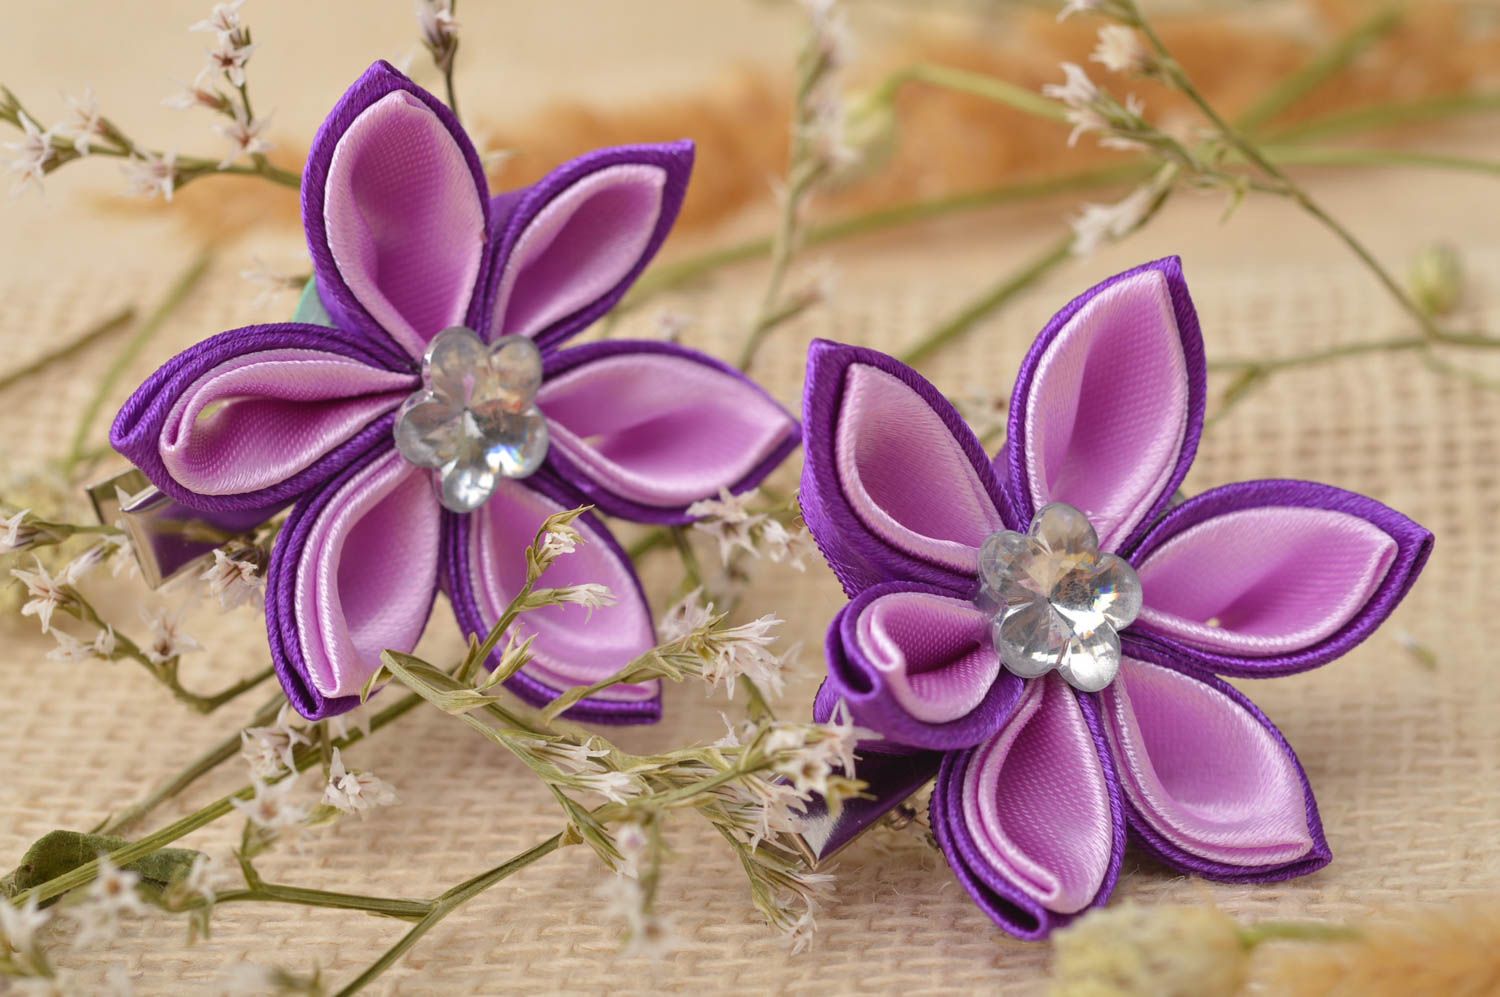 Handmade hair accessories handcrafted jewelry set 2 kanzashi flowers hair clips photo 1